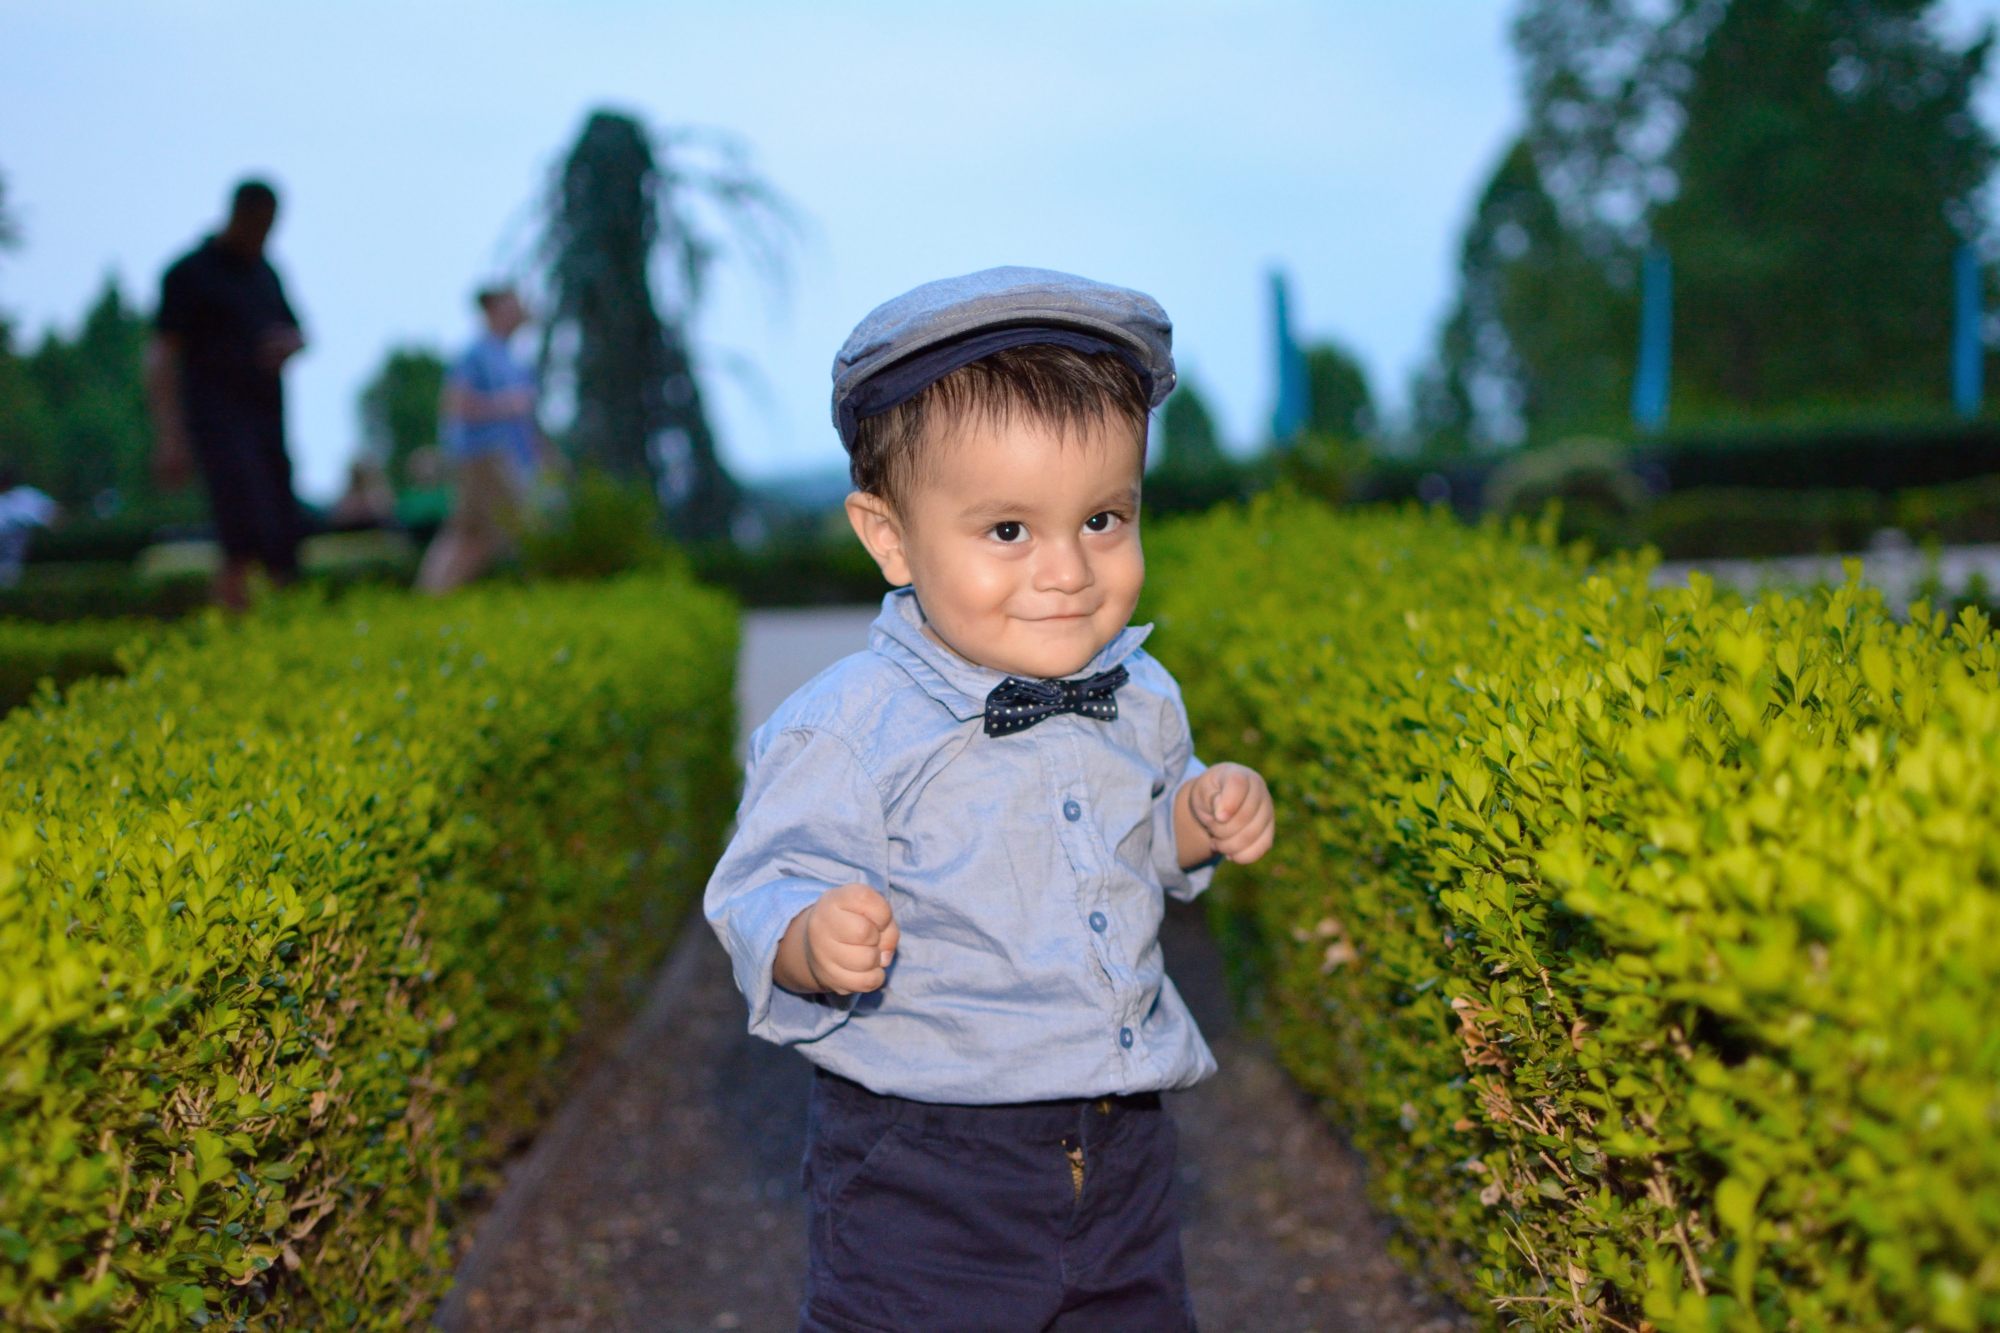 tomas hric photography offers stunning family photography, little cute boy portrait in ally of hedges